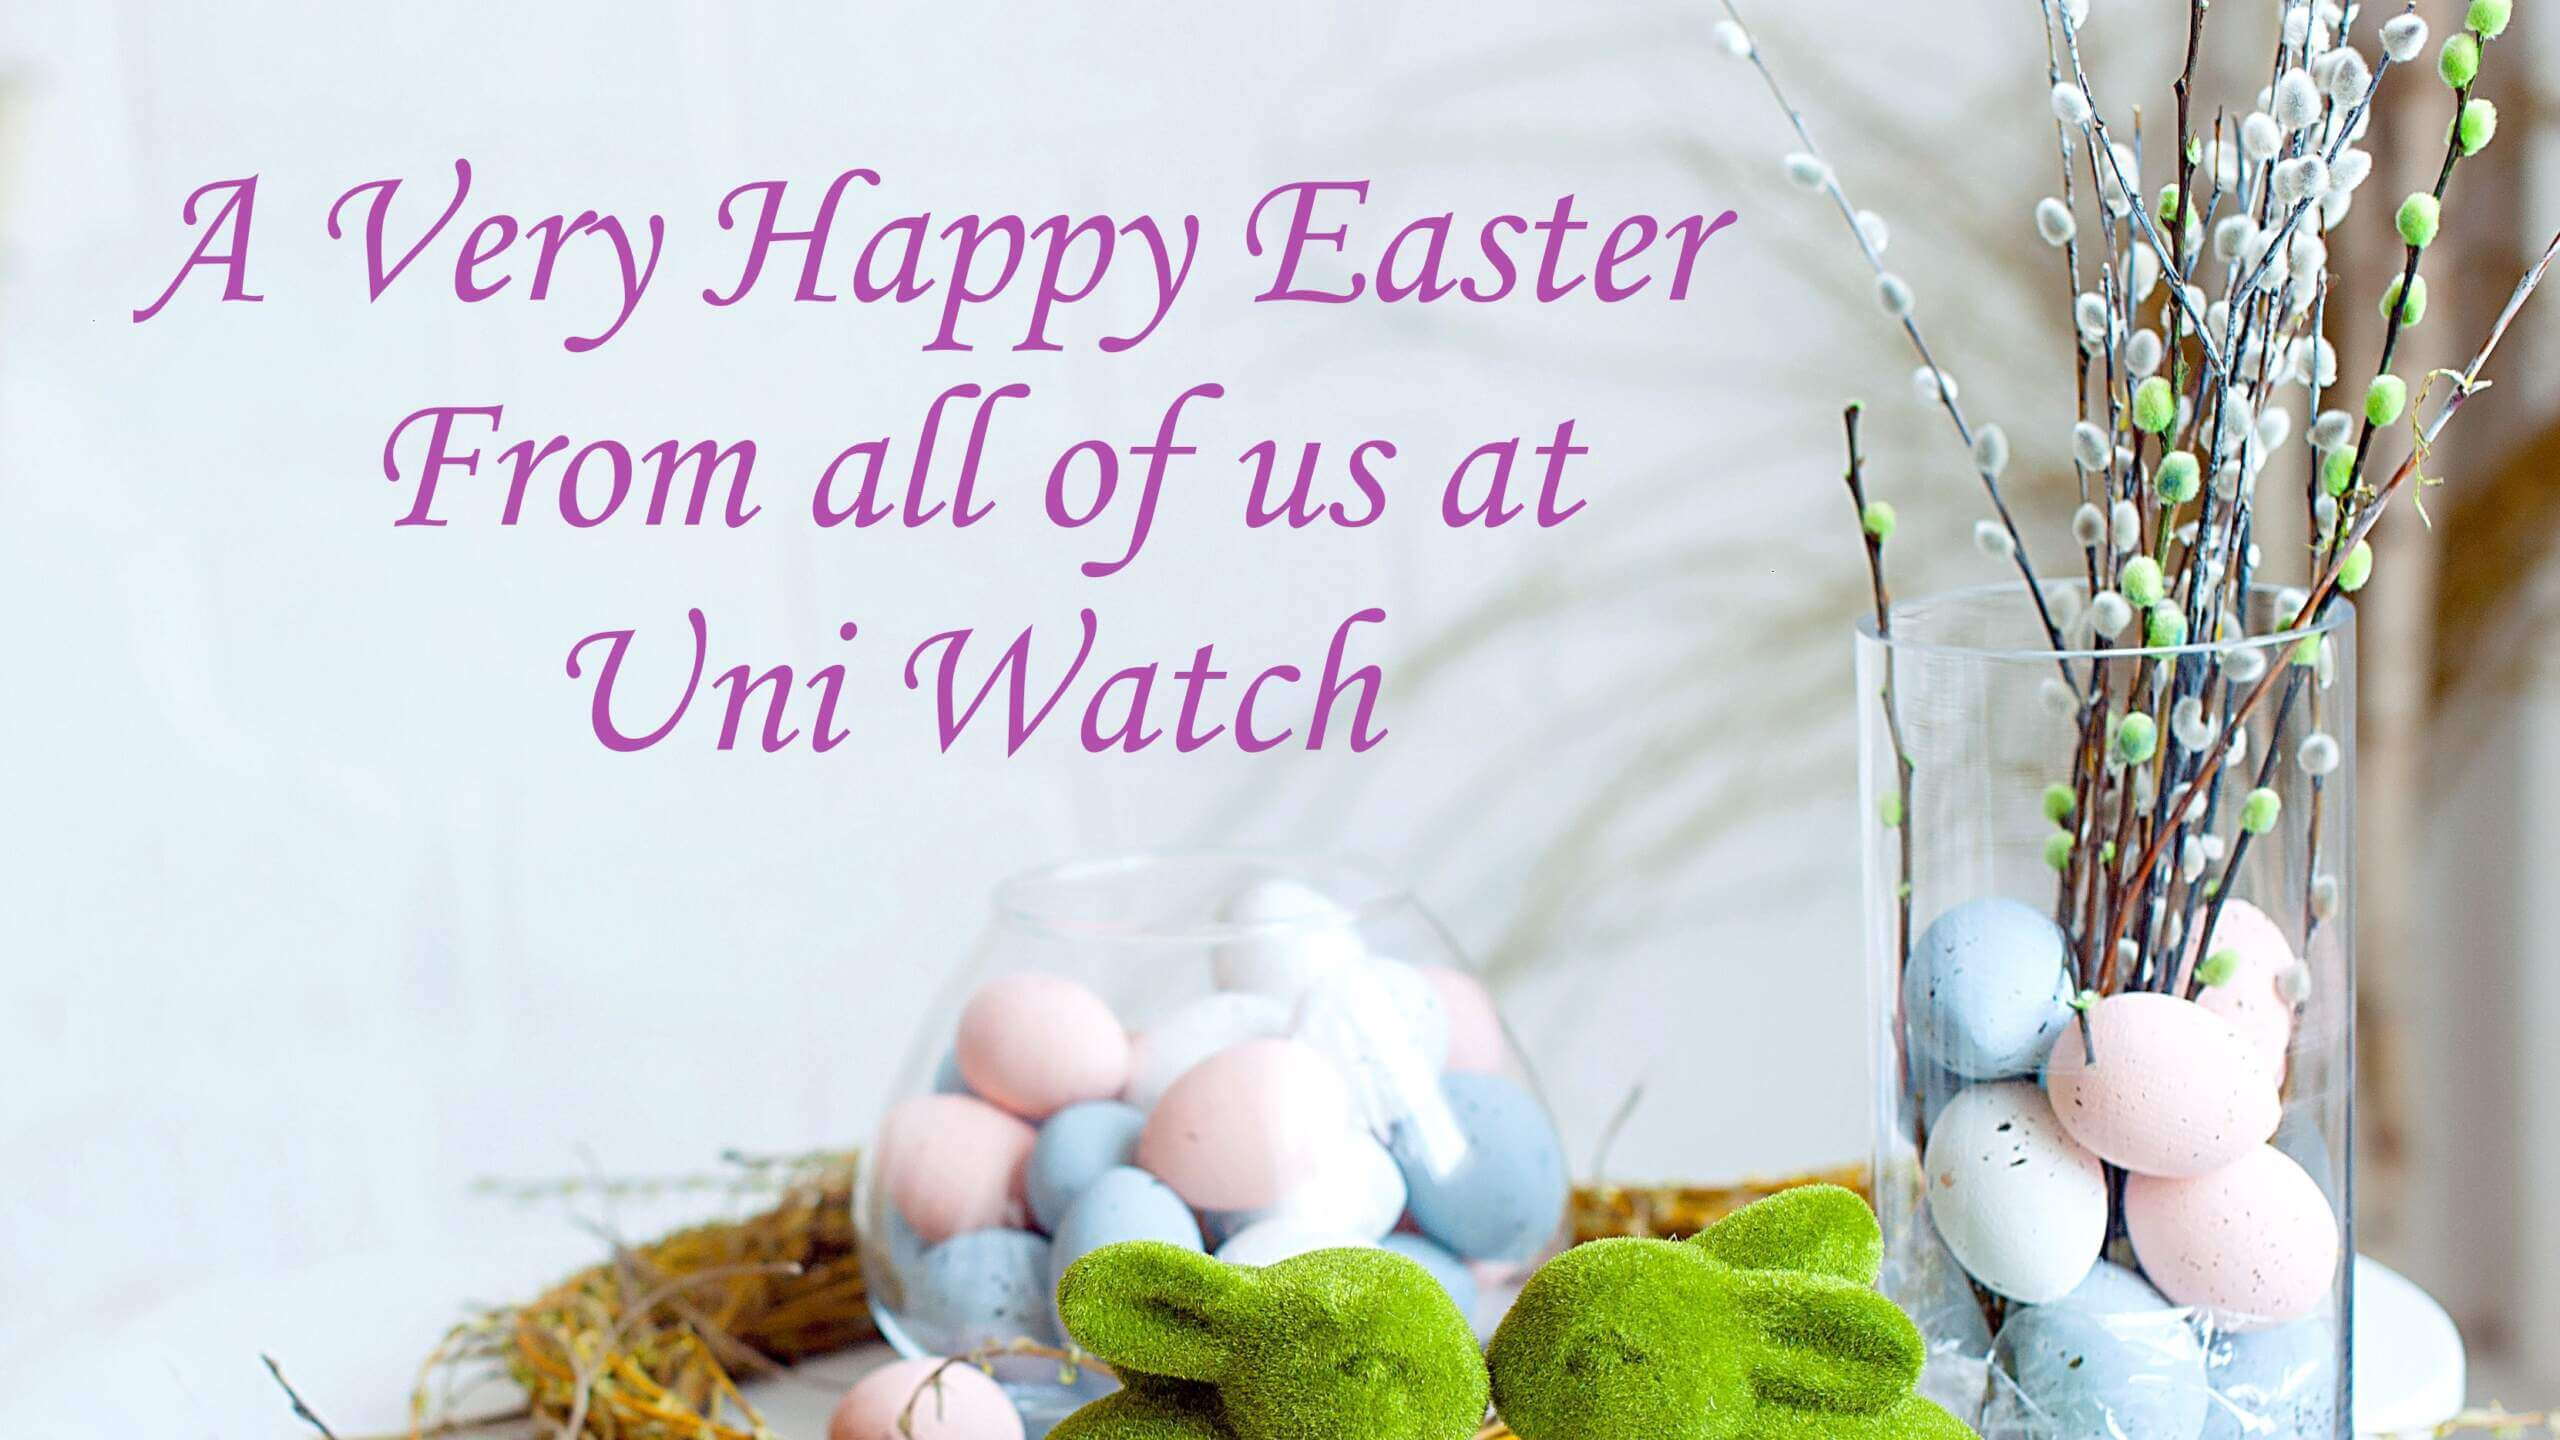 Happy Easter from Uni Watch